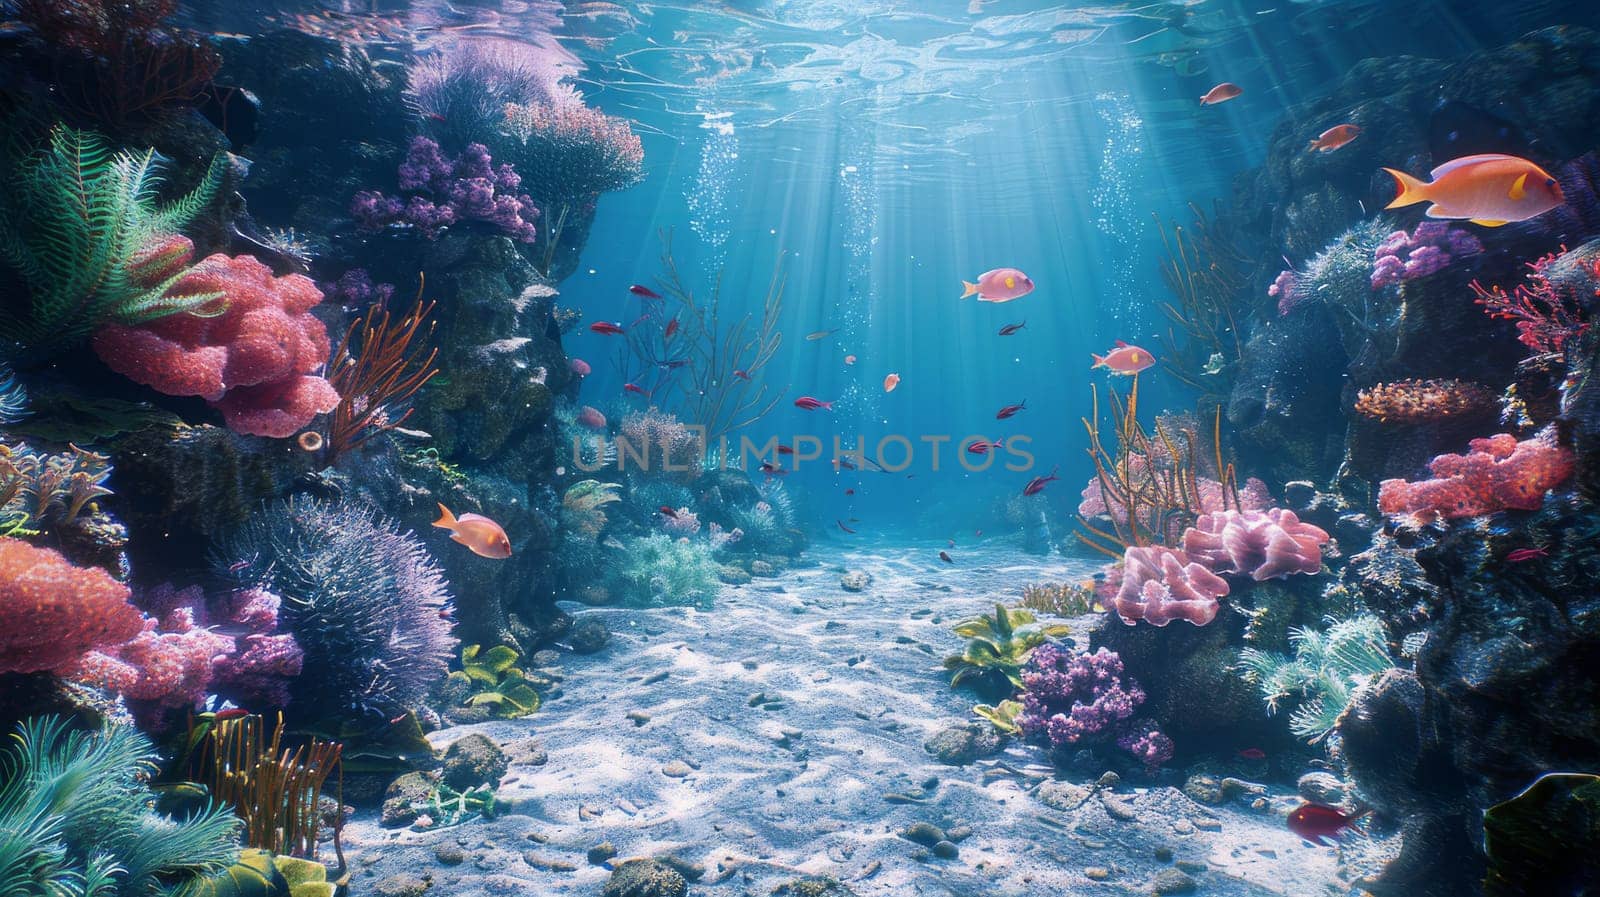 A colorful underwater scene with a path of coral and fish swimming by. Scene is peaceful and serene, as the vibrant colors of the coral and fish create a sense of calmness and tranquility